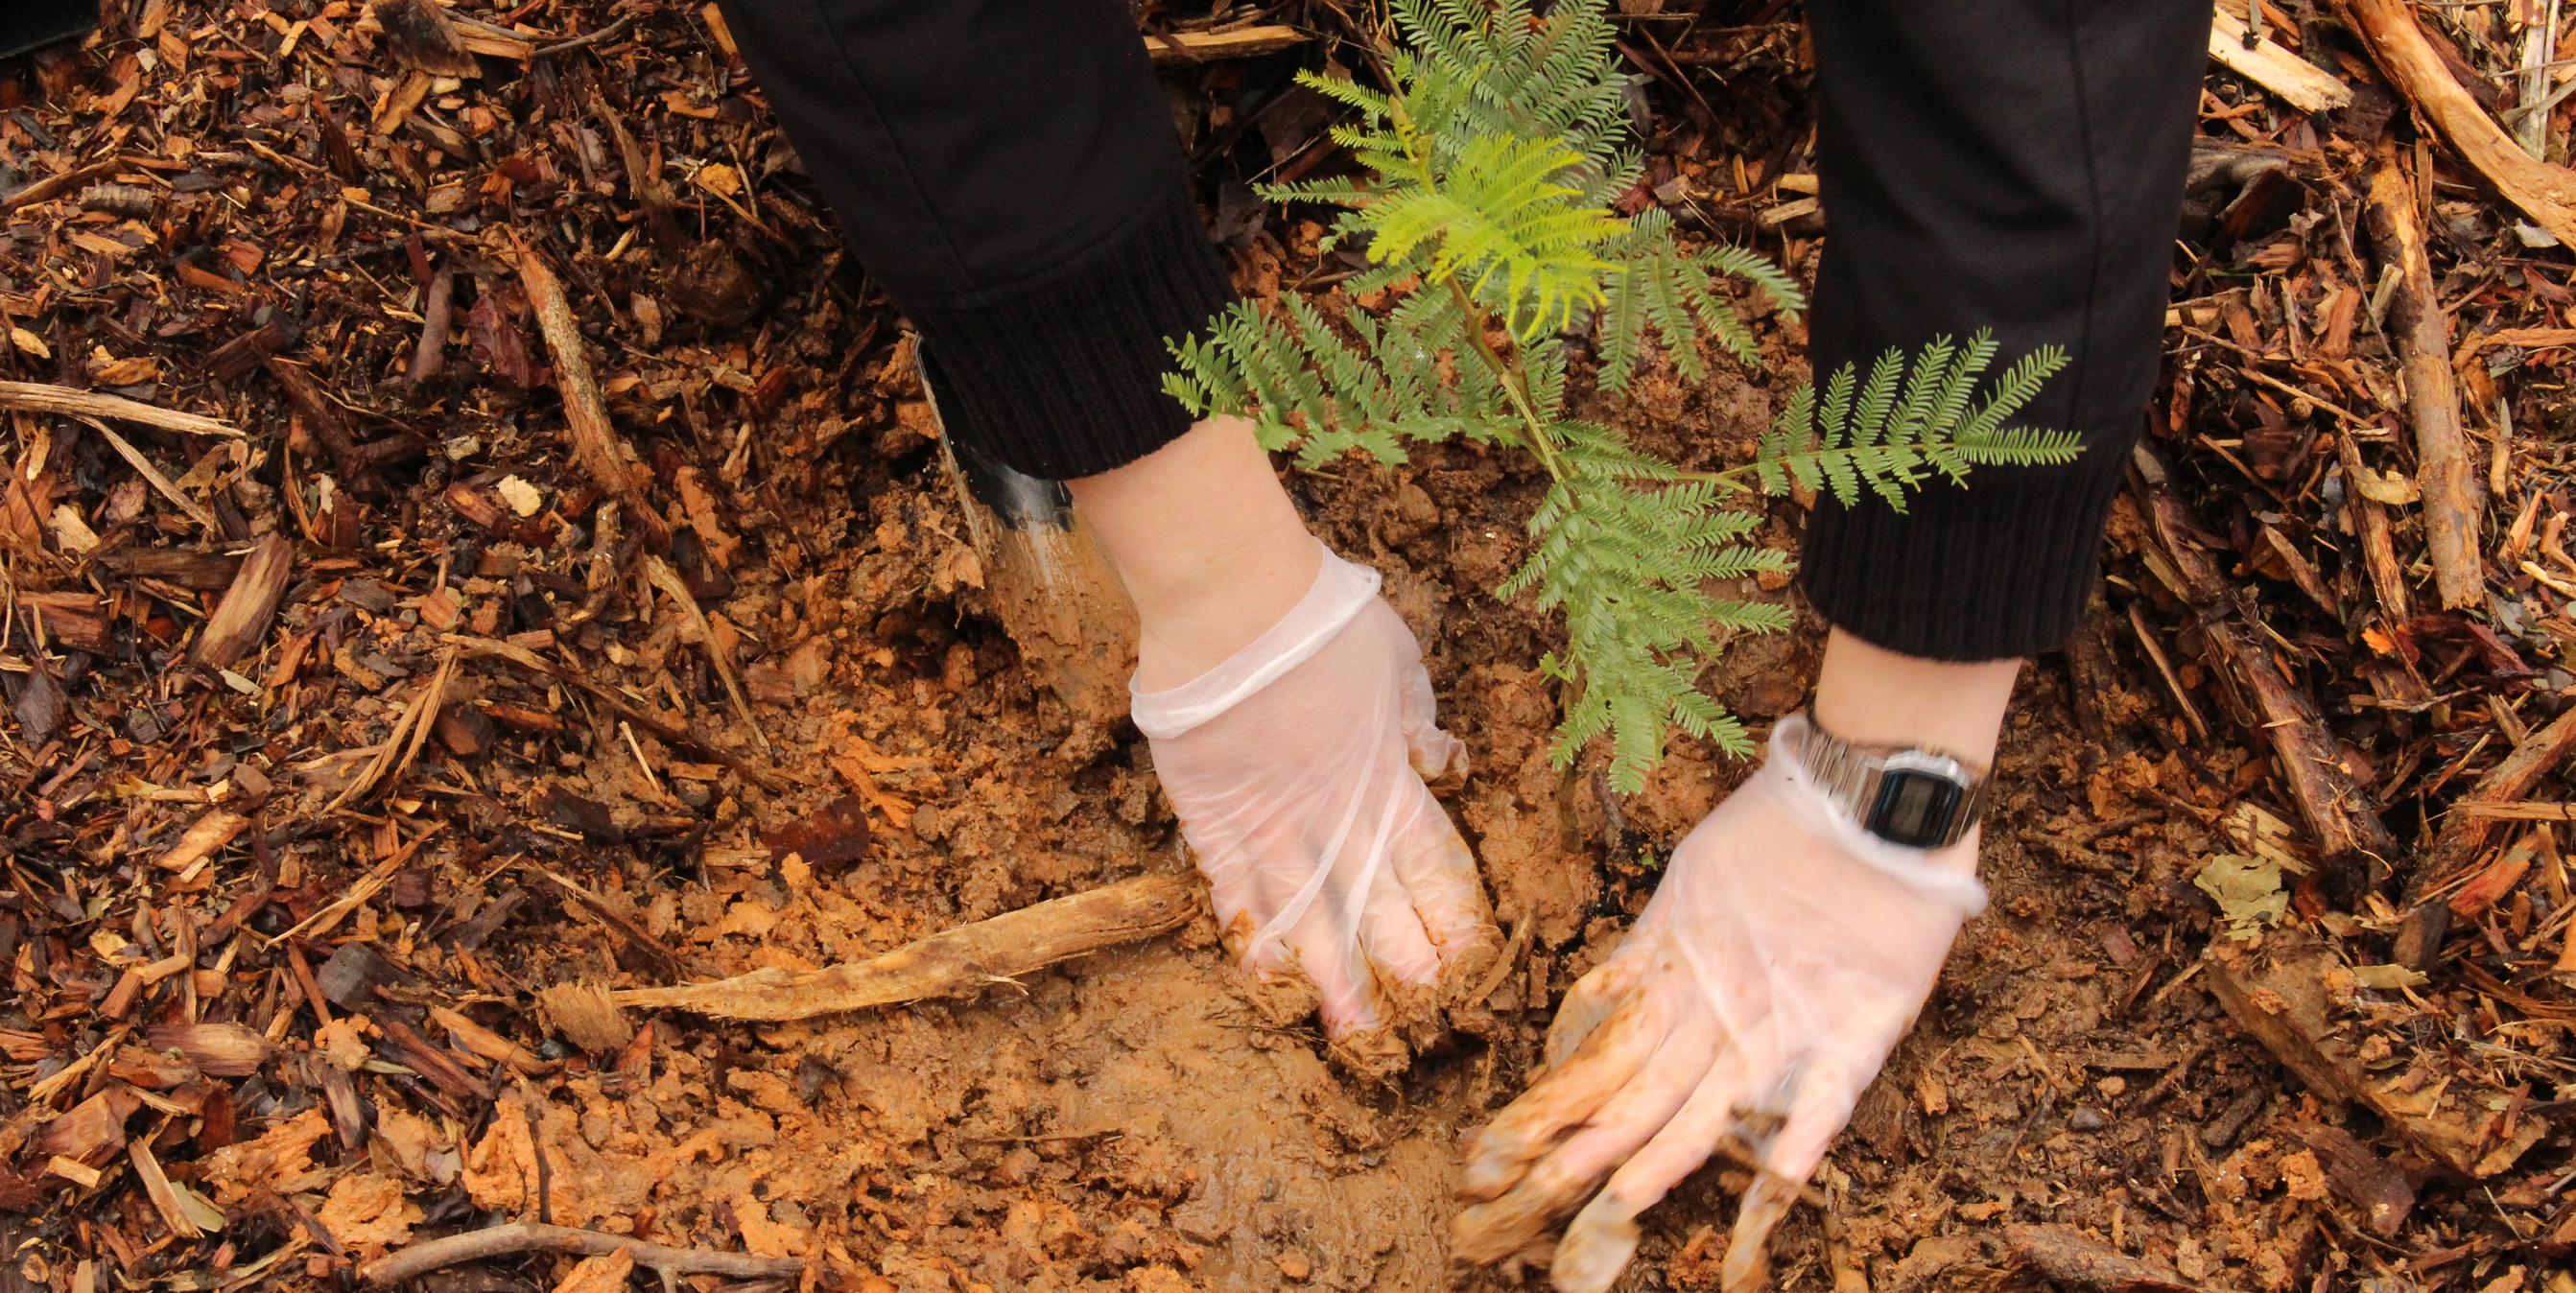 A person off-camera planting a tree. Hands cup the small shrub as they place it into the ground.